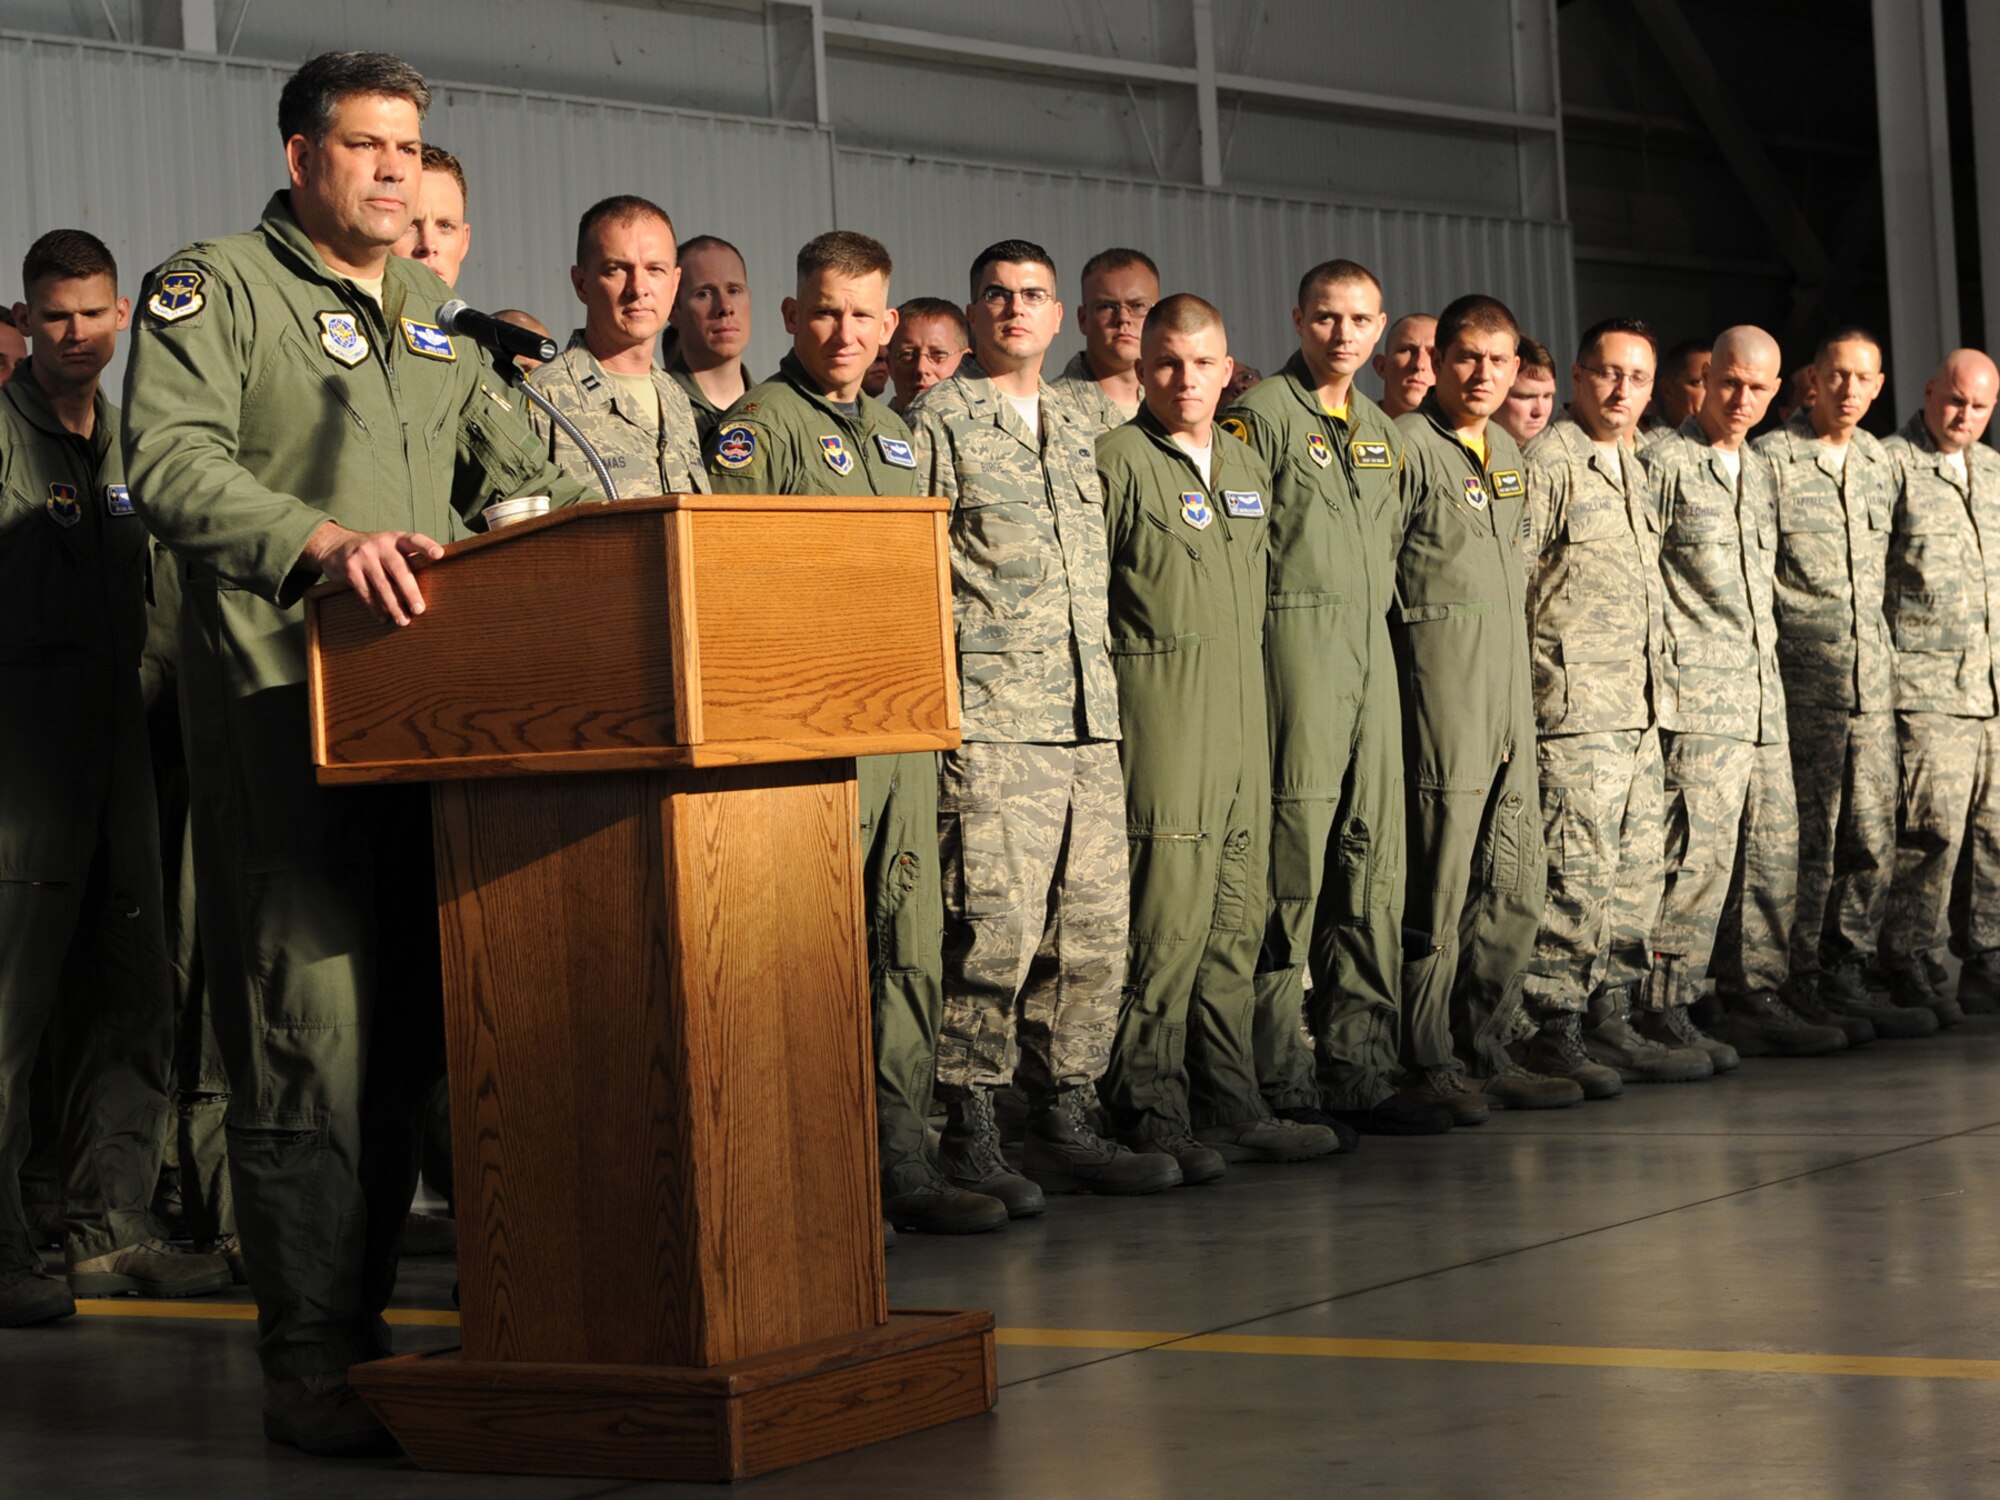 LITTLE ROCK AIR FORCE BASE, Ark. -- Col. Greg Otey, 19th Airlift Wing commander, speaks to the 19th Airlift Wing Rodeo team during the 2009 Rodeo kick-off ceremony here July 17. (U. S. Air Force photo by Senior Airman Jim Araos)